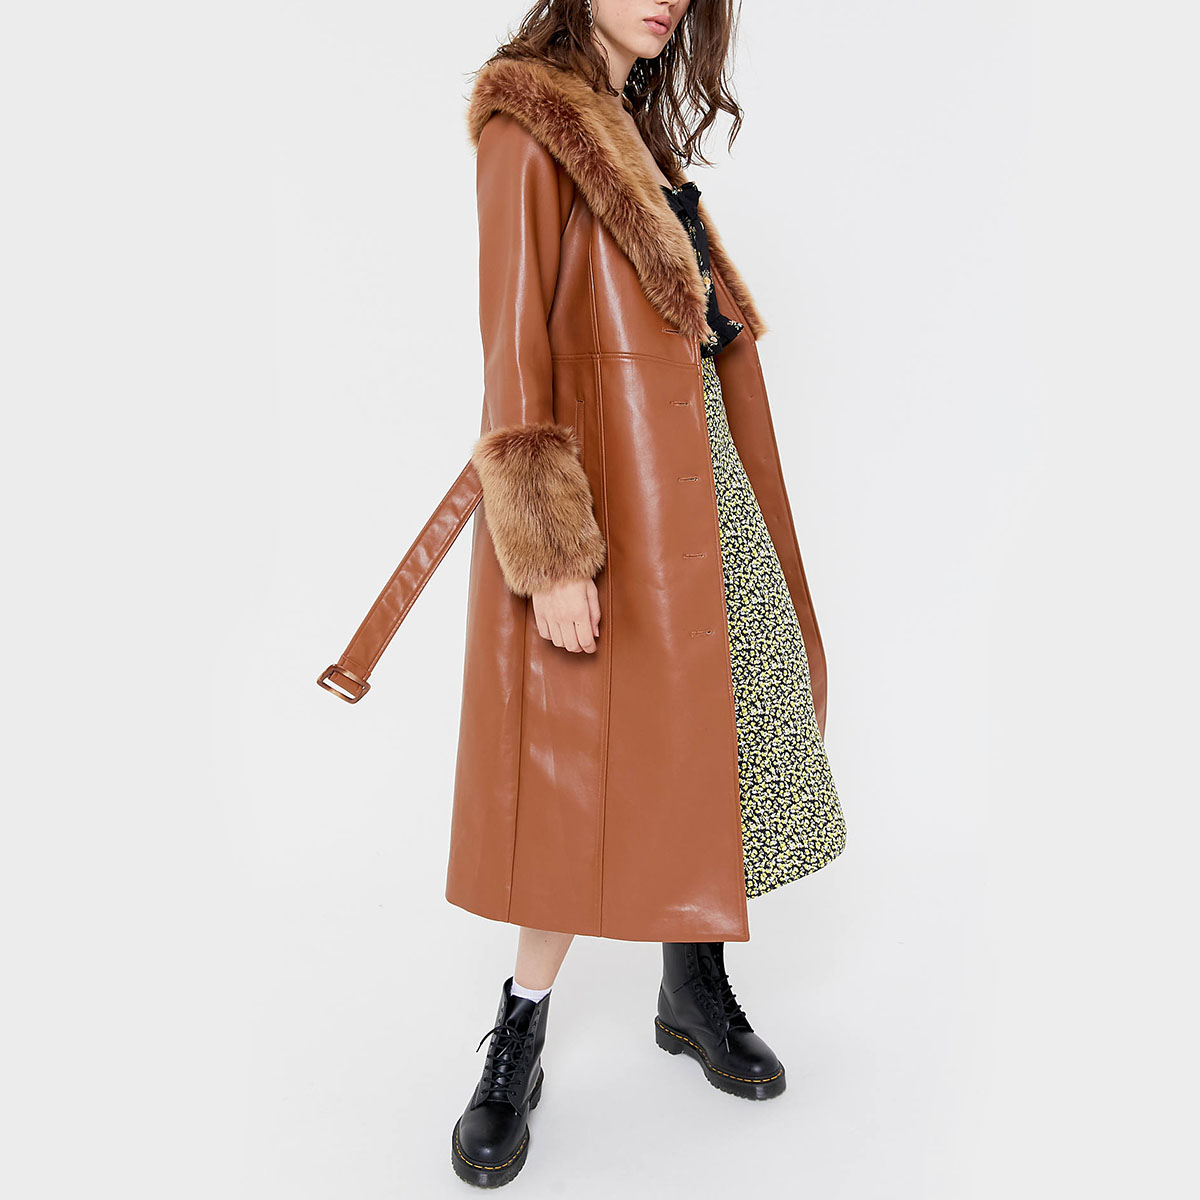 Affordable Coats On 55 Off, Affordable Winter Coats Womens